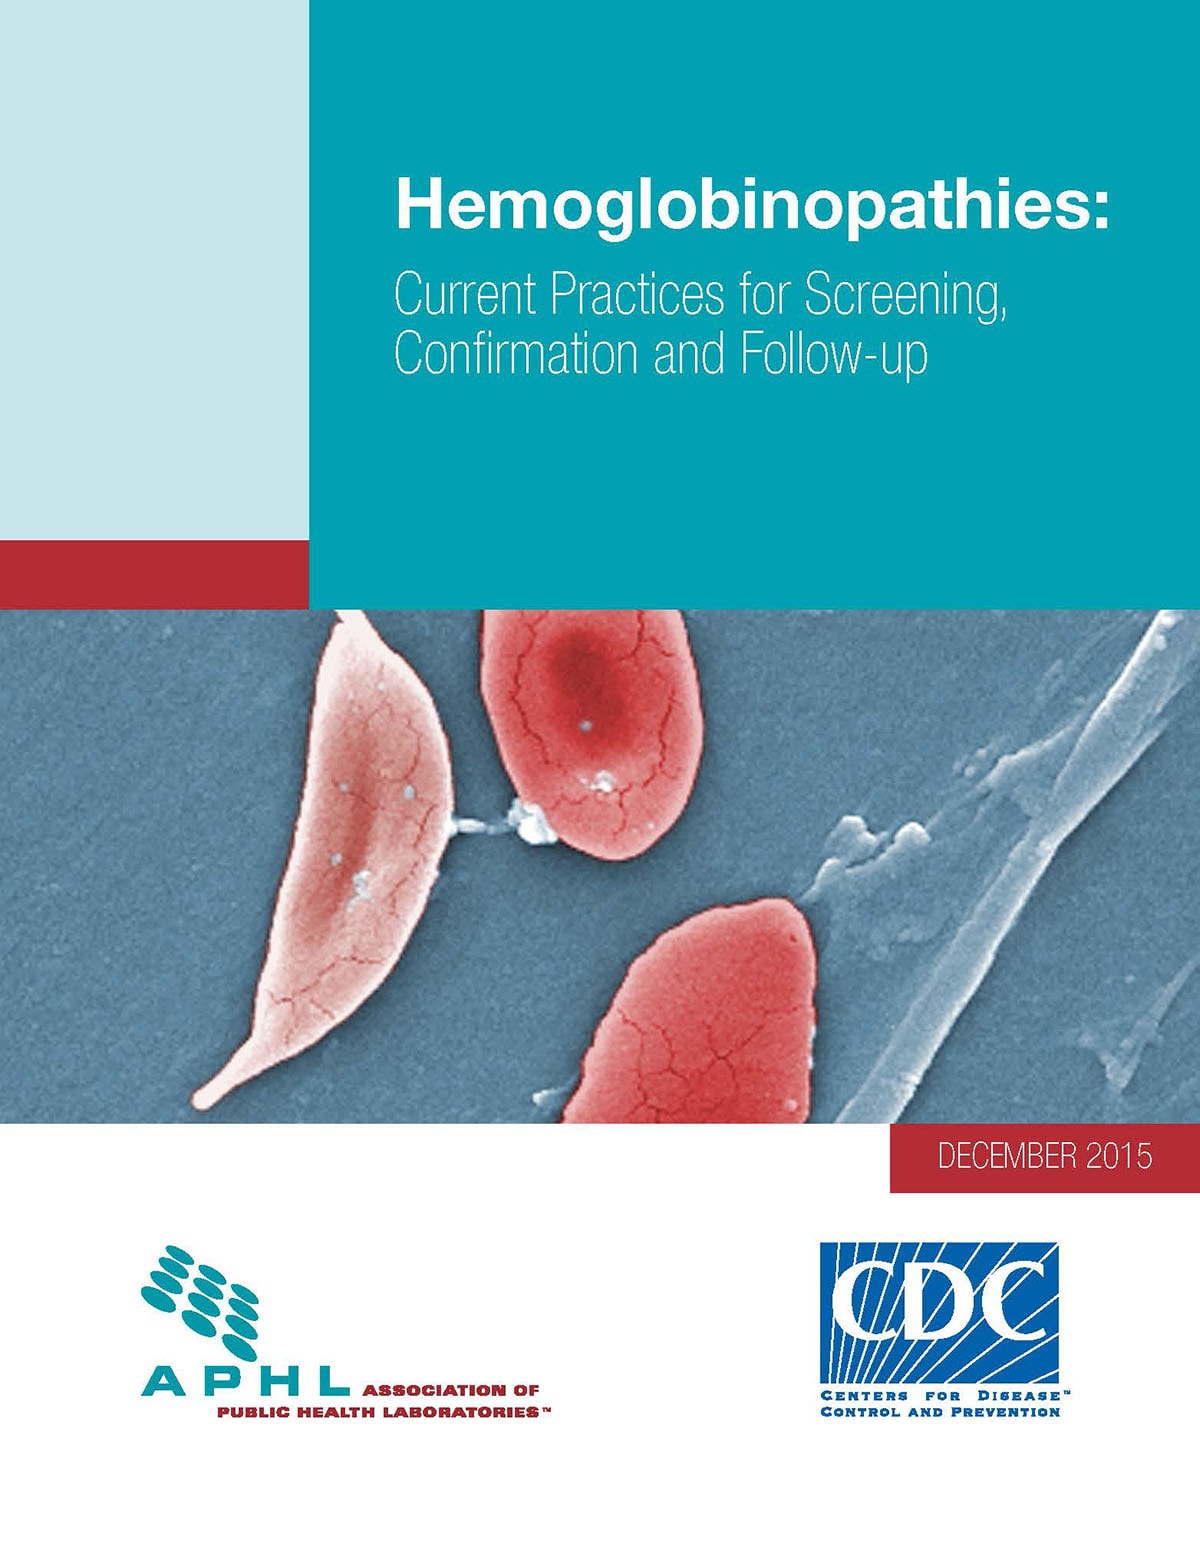 hemoglobinopathies: current practices for screening, confirmation and follow-up